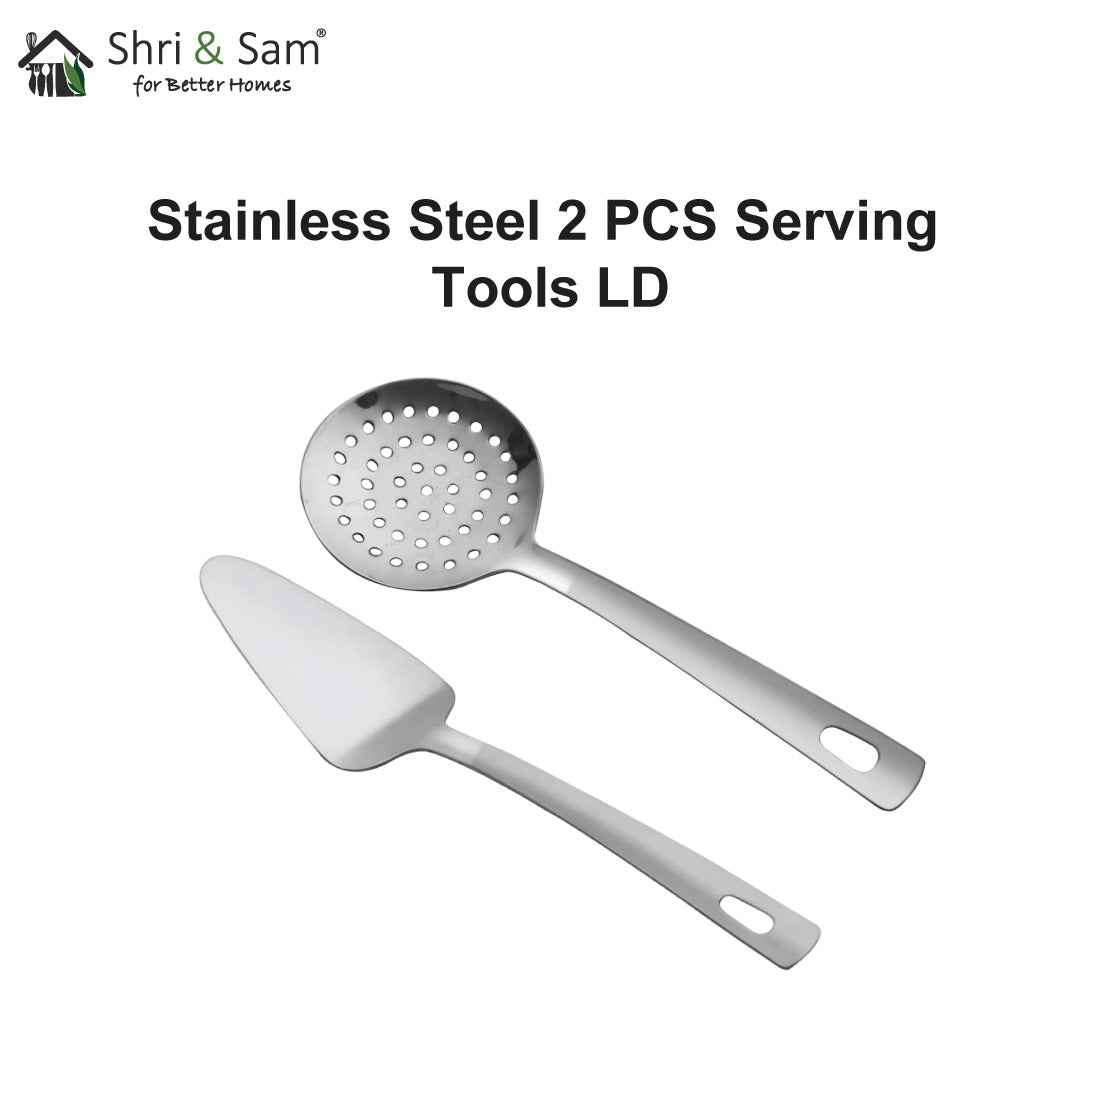 Stainless Steel 2 PCS Serving Tools LD